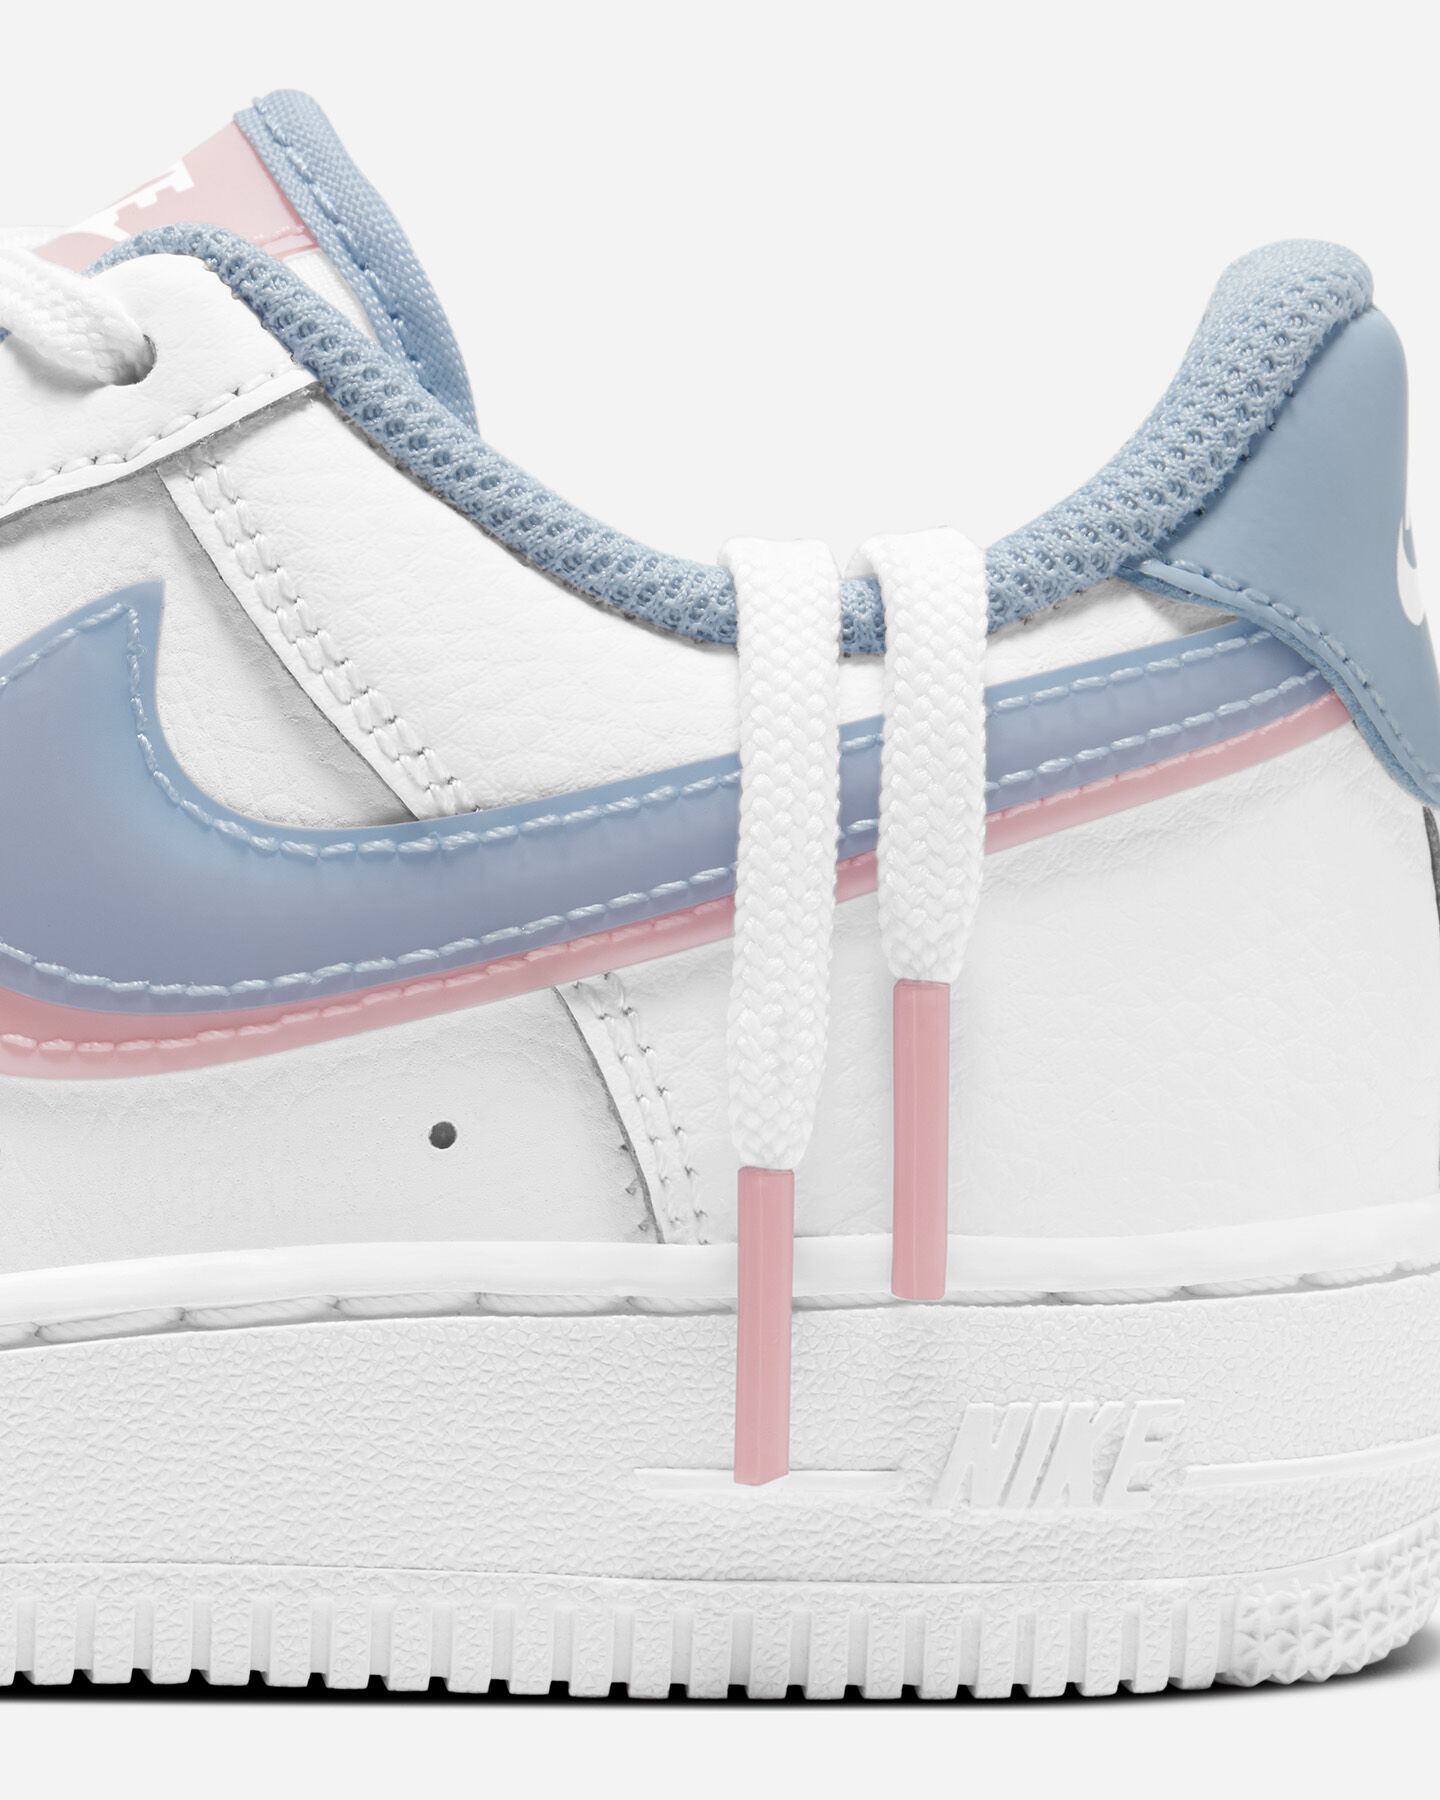 air force 1 azzurre donna